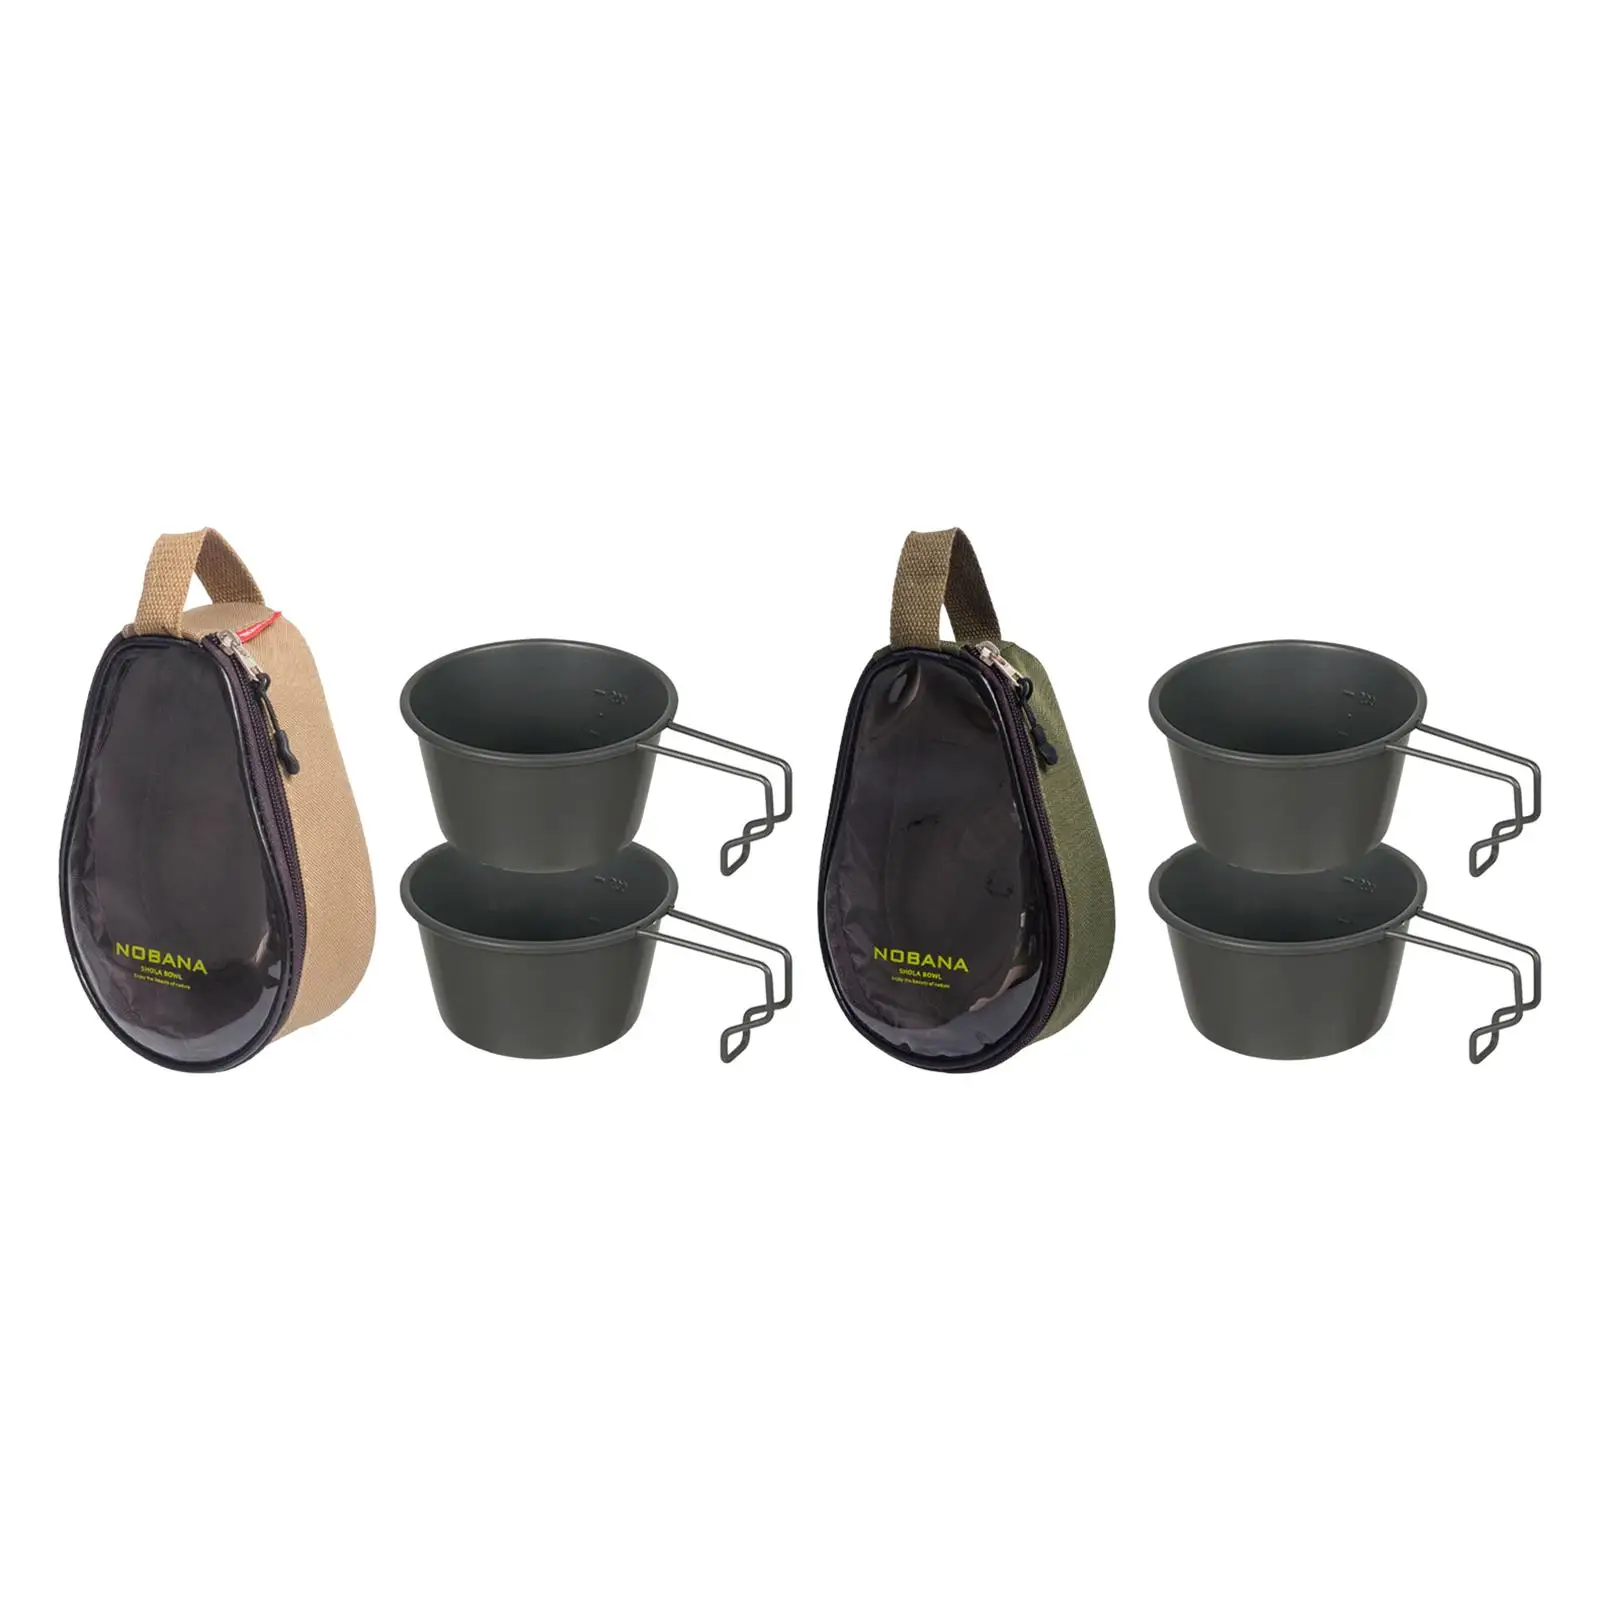 3 PCS stainless steel mugs with storage bag, portable picnic tableware in the